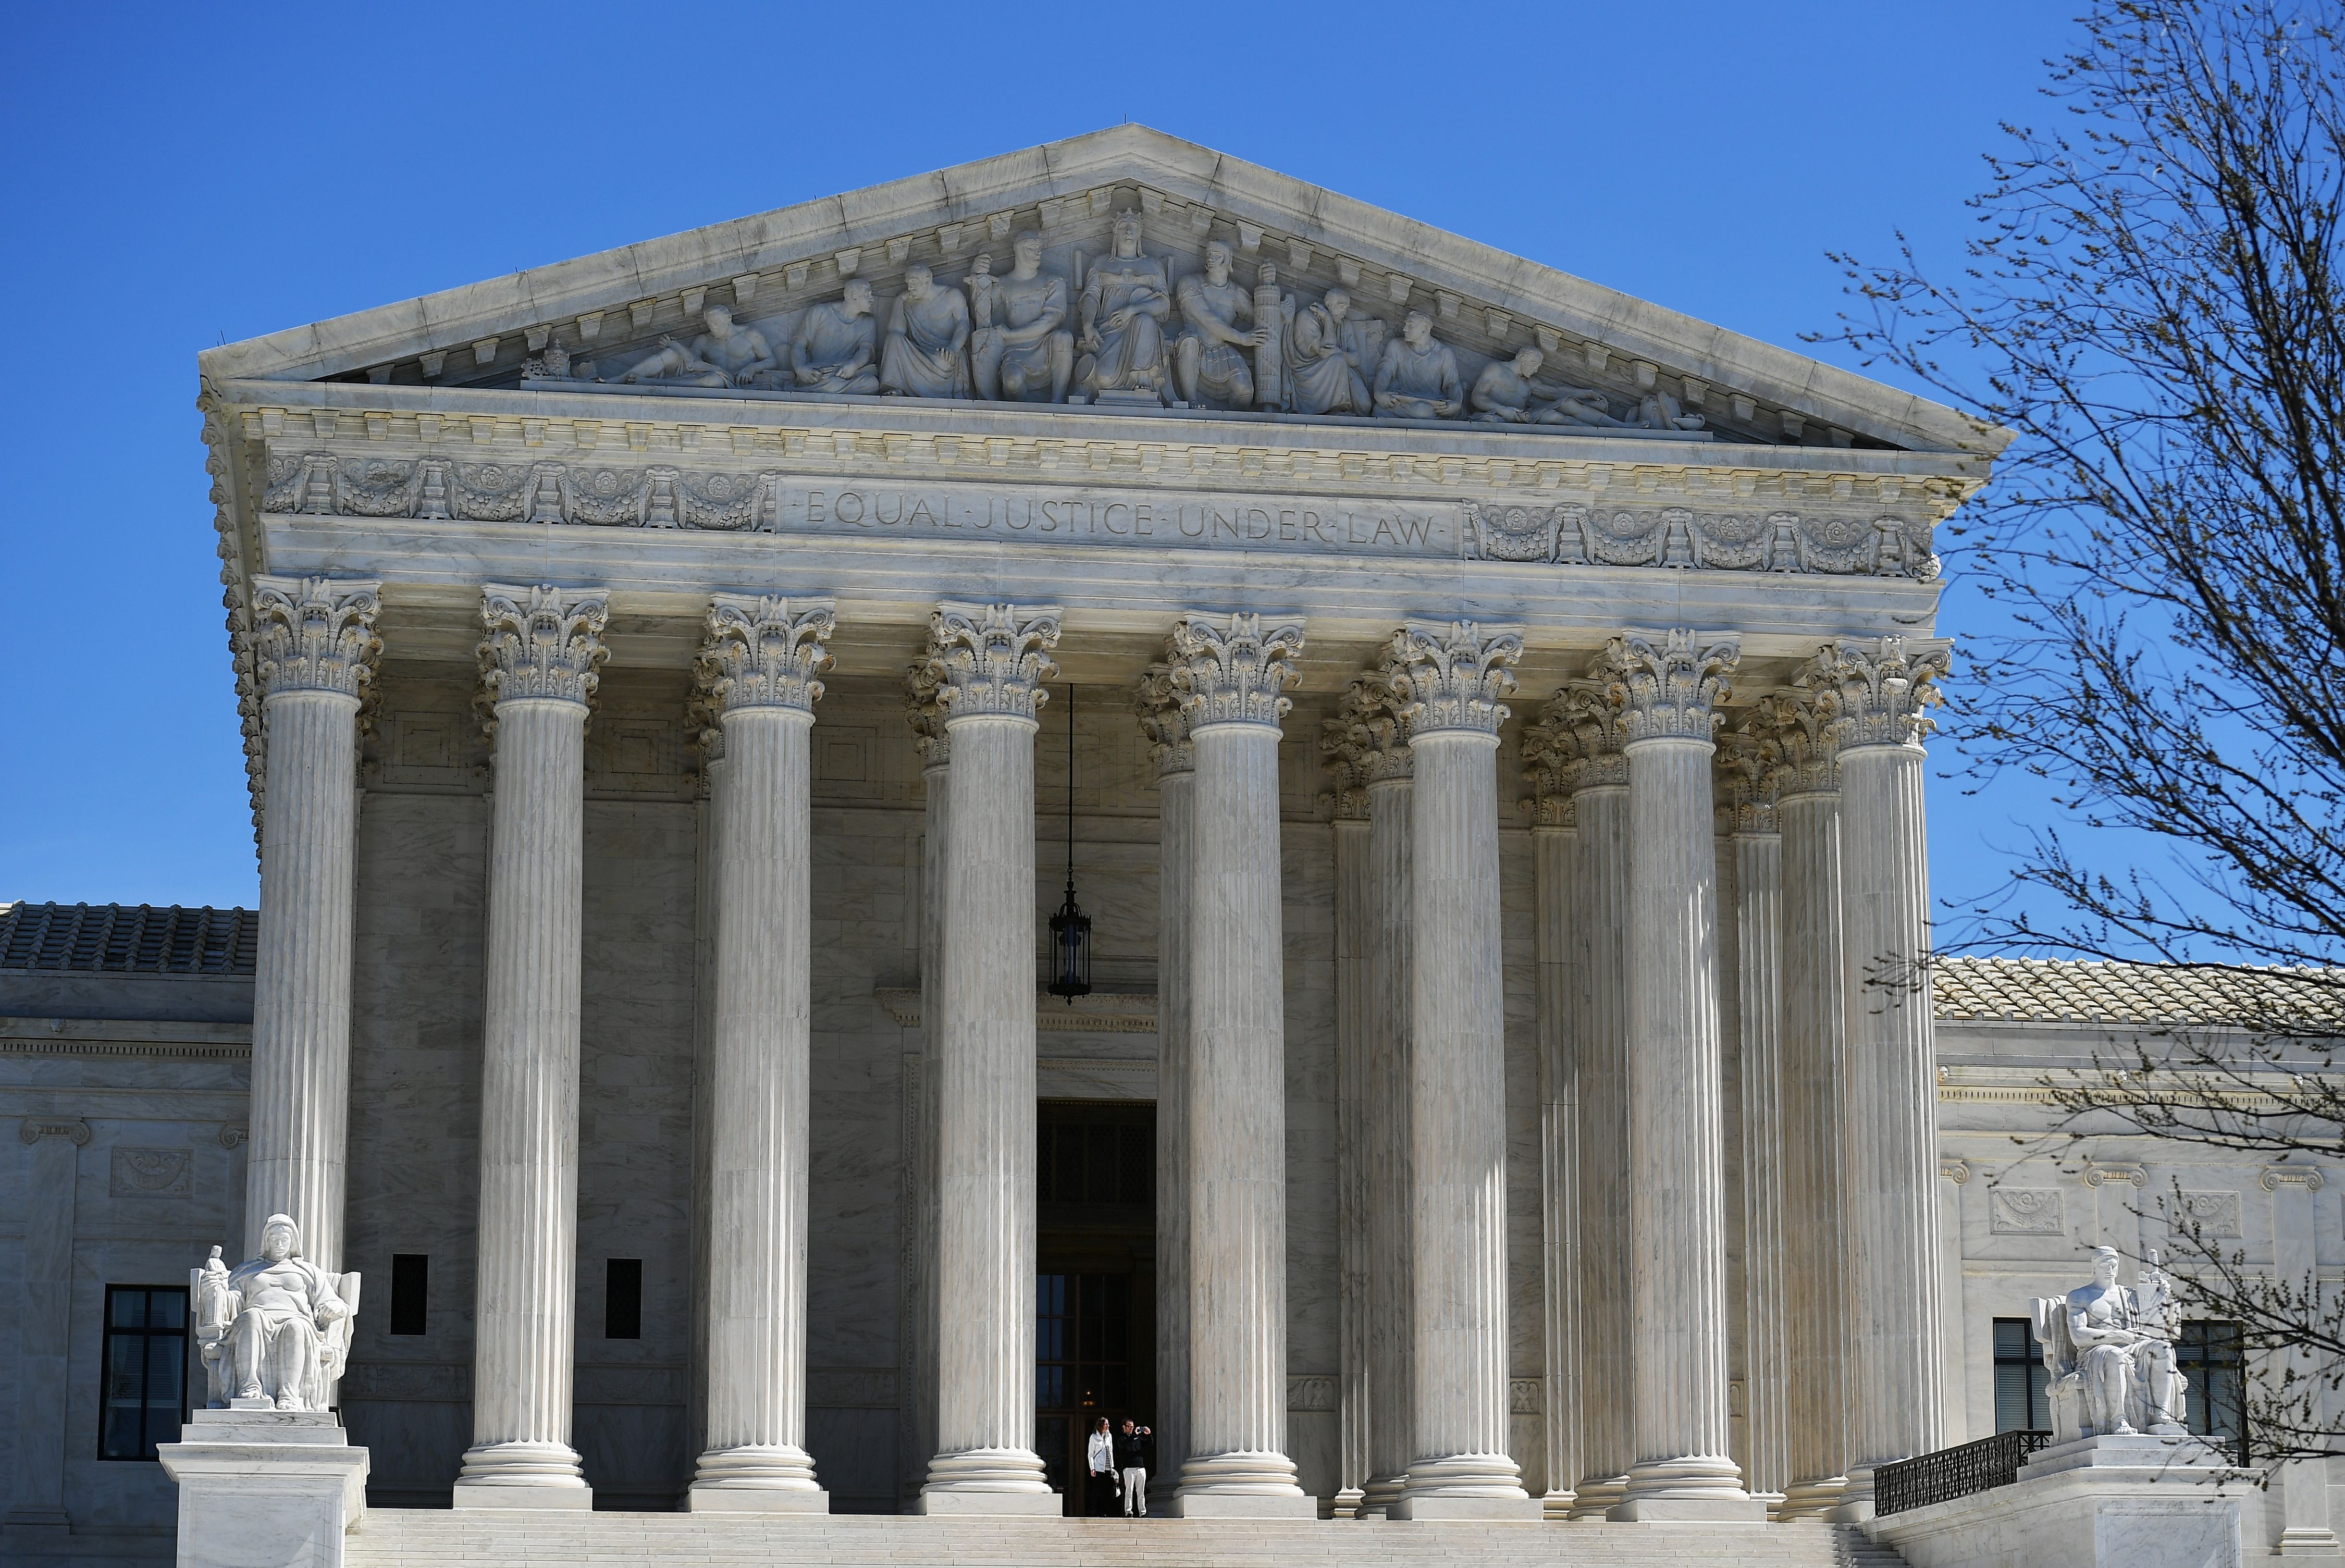 The Supreme Court as seen on March 27, 2019 (Mandel Ngan/AFP/Getty Images)